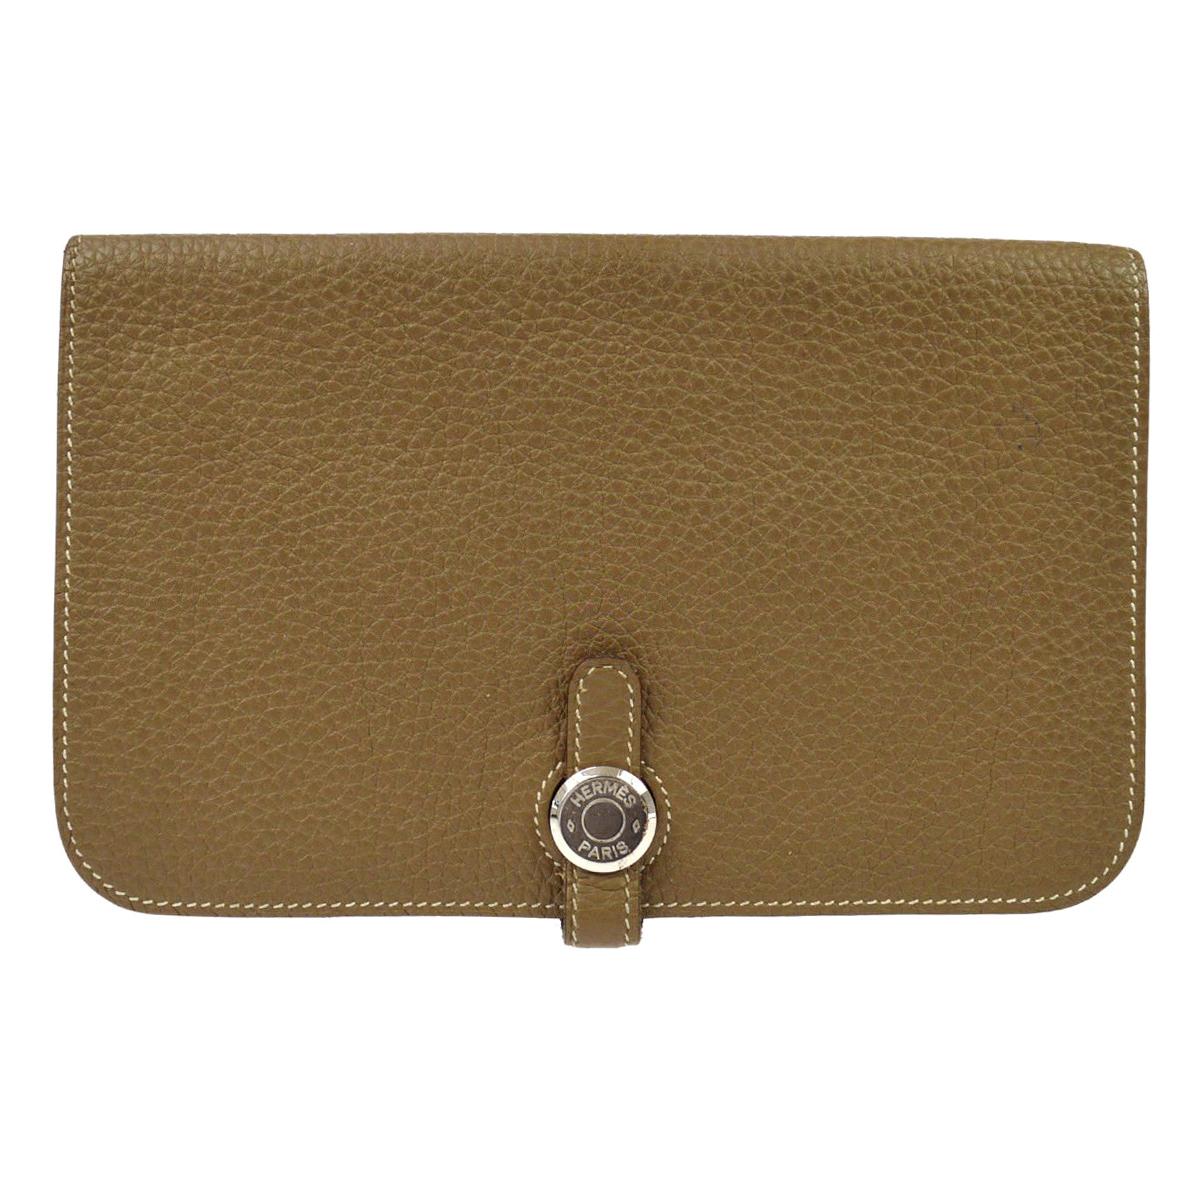 Hermes Tan Taupe Leather Silver Fold Over Flap Evening Wallet Clutch ...